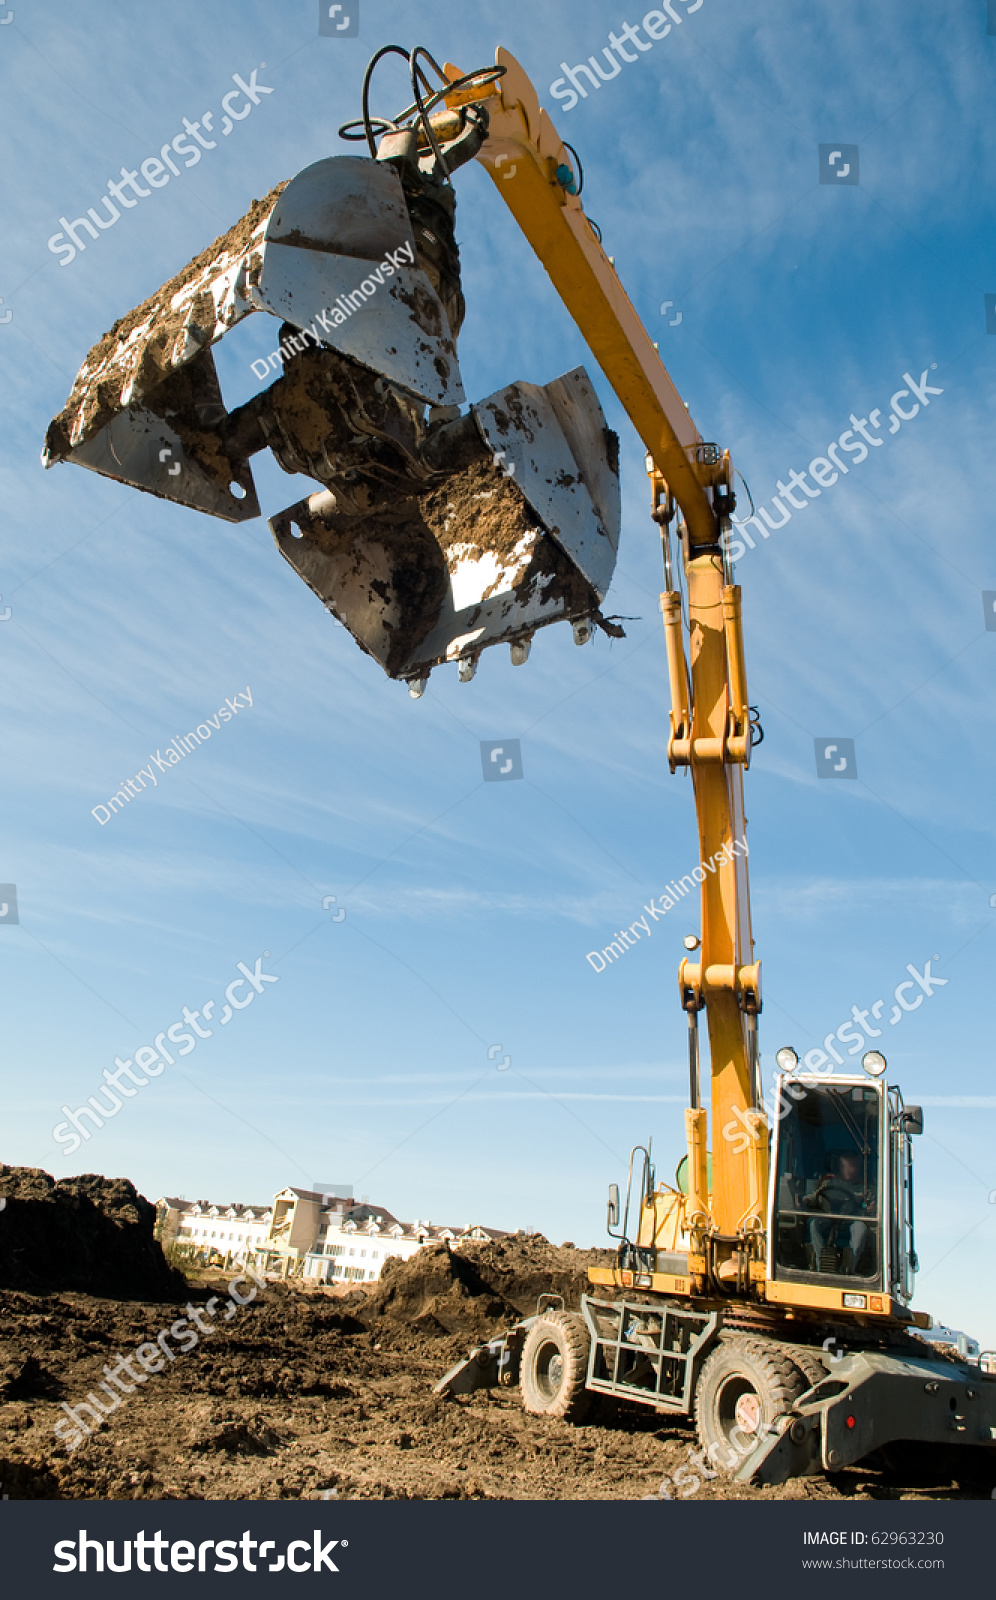 excavator loader machine during earthmoving works outdoors at construction site #62963230